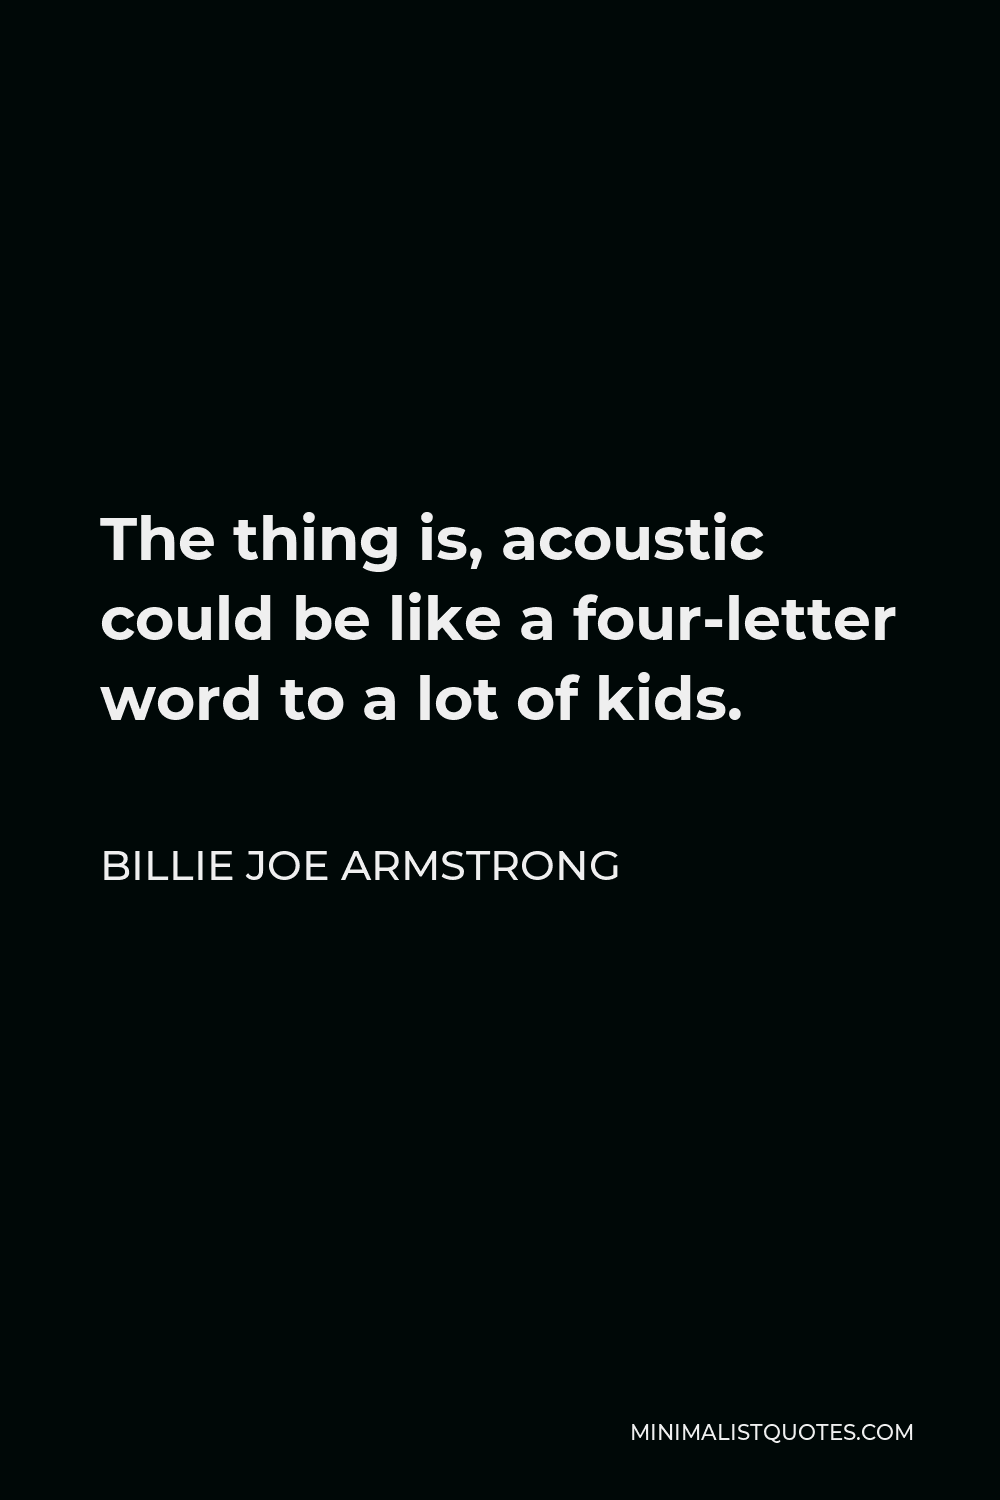 Billie Joe Armstrong Quote - The thing is, acoustic could be like a four-letter word to a lot of kids.